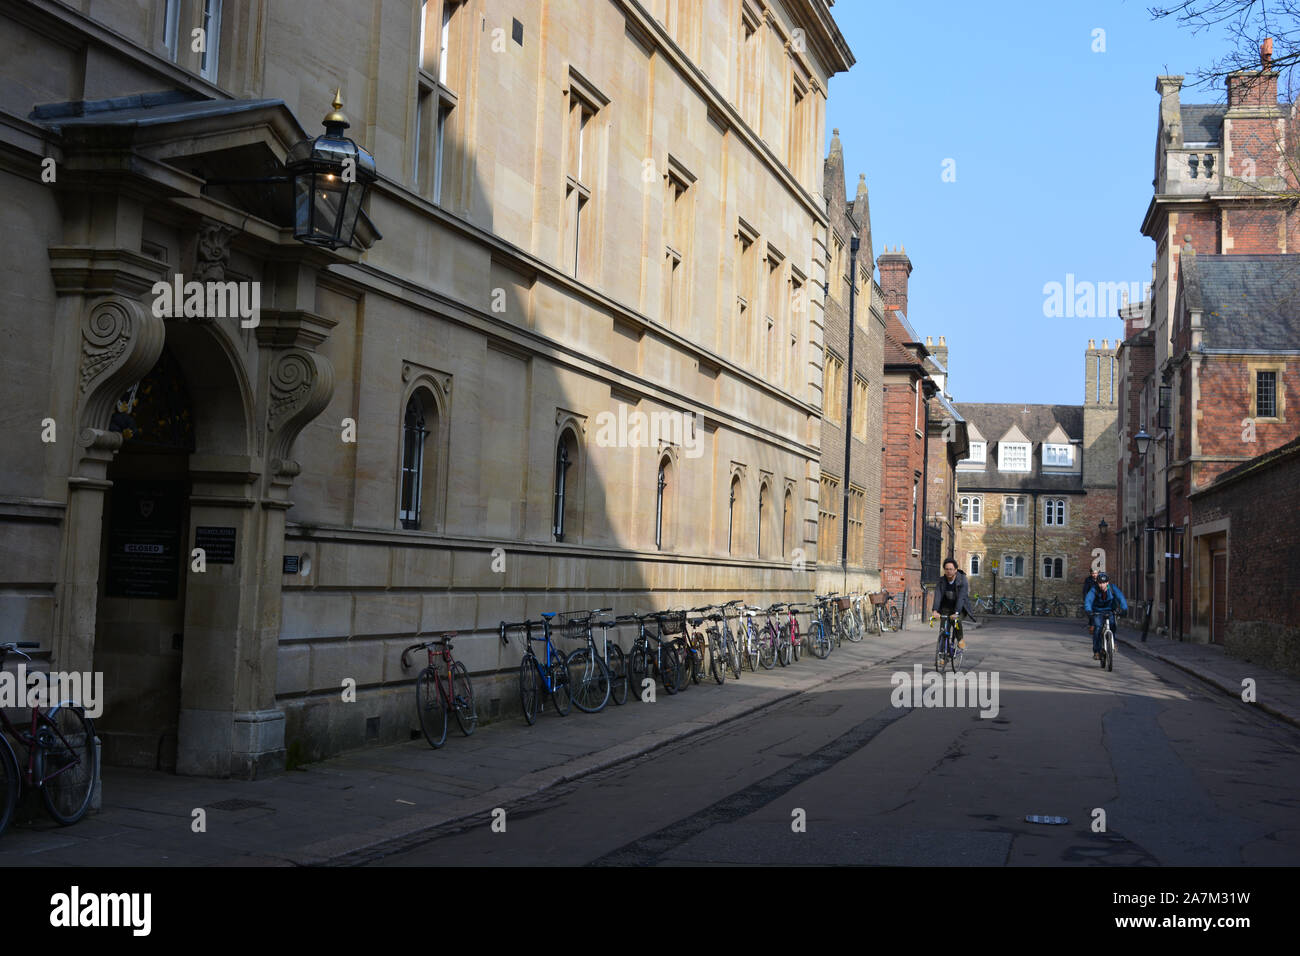 Cyclists in Trinity Lane, with students bikes outside a college, University of Cambridge, Cambridge, Cambs., England Stock Photo